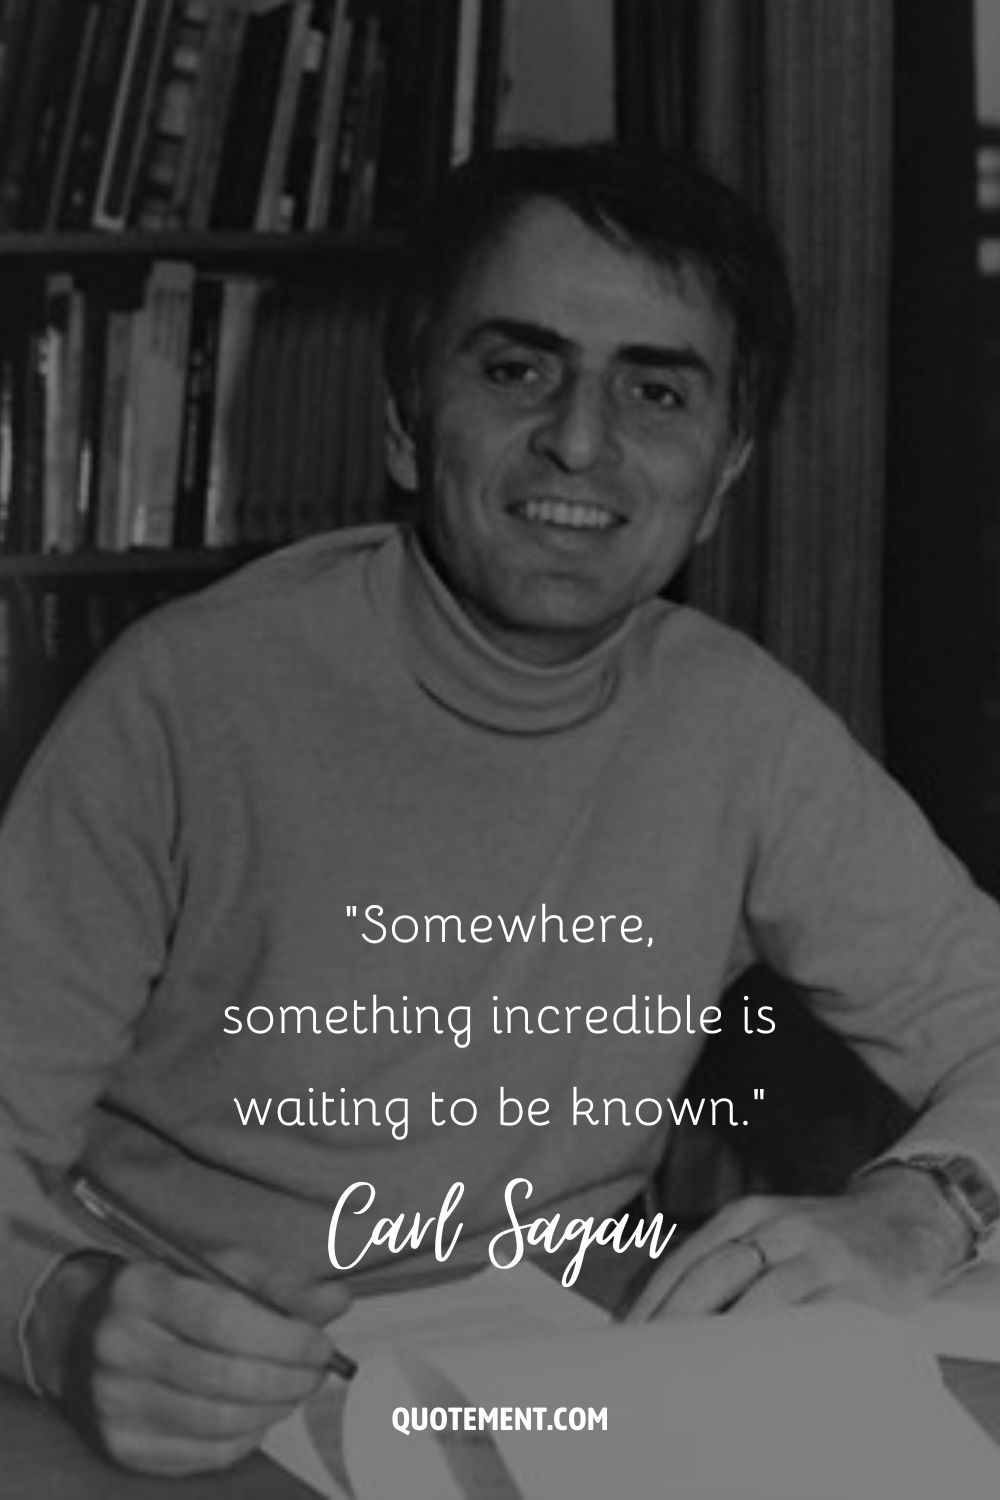 100 Carl Sagan Quotes To Awaken The Scientist In You